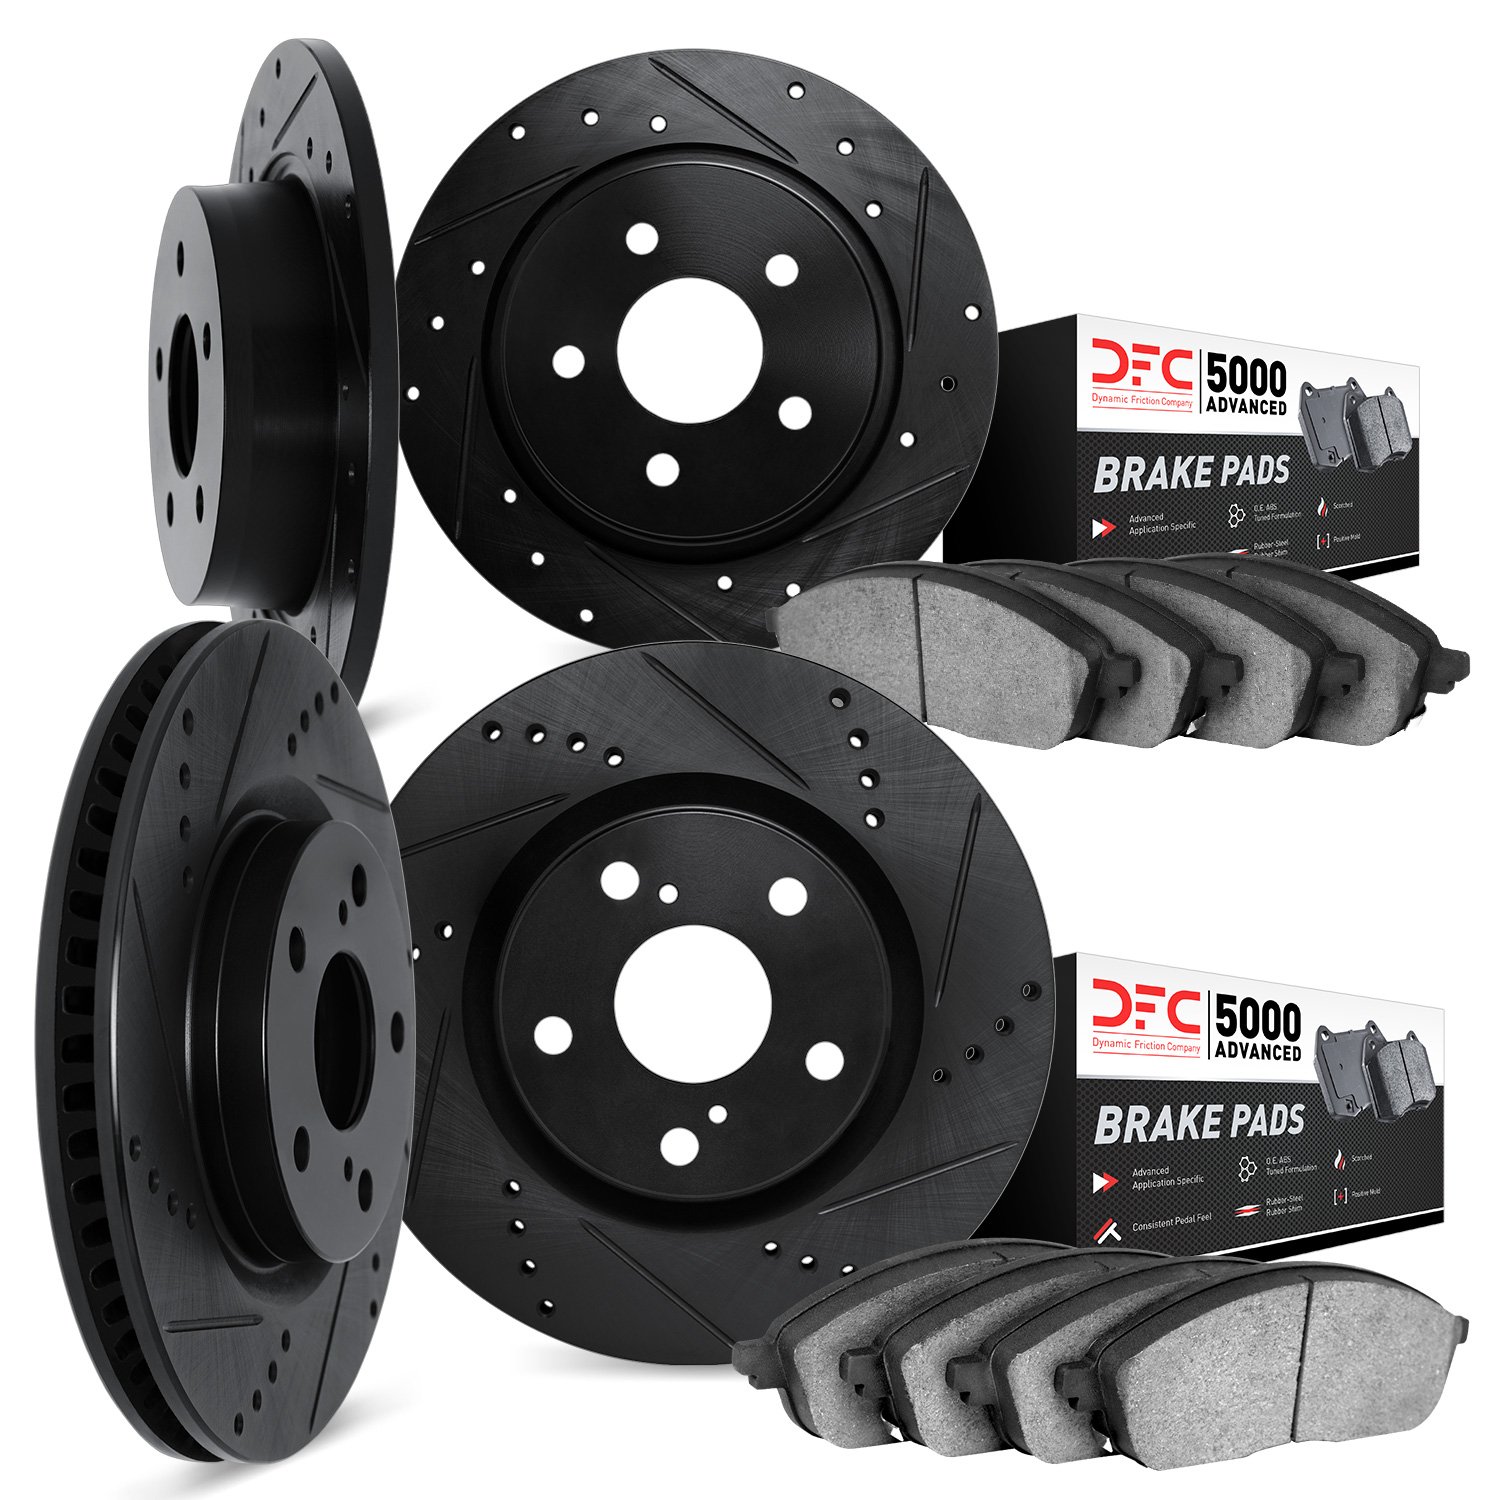 8504-76158 Drilled/Slotted Brake Rotors w/5000 Advanced Brake Pads Kit [Black], 2004-2005 Lexus/Toyota/Scion, Position: Front an